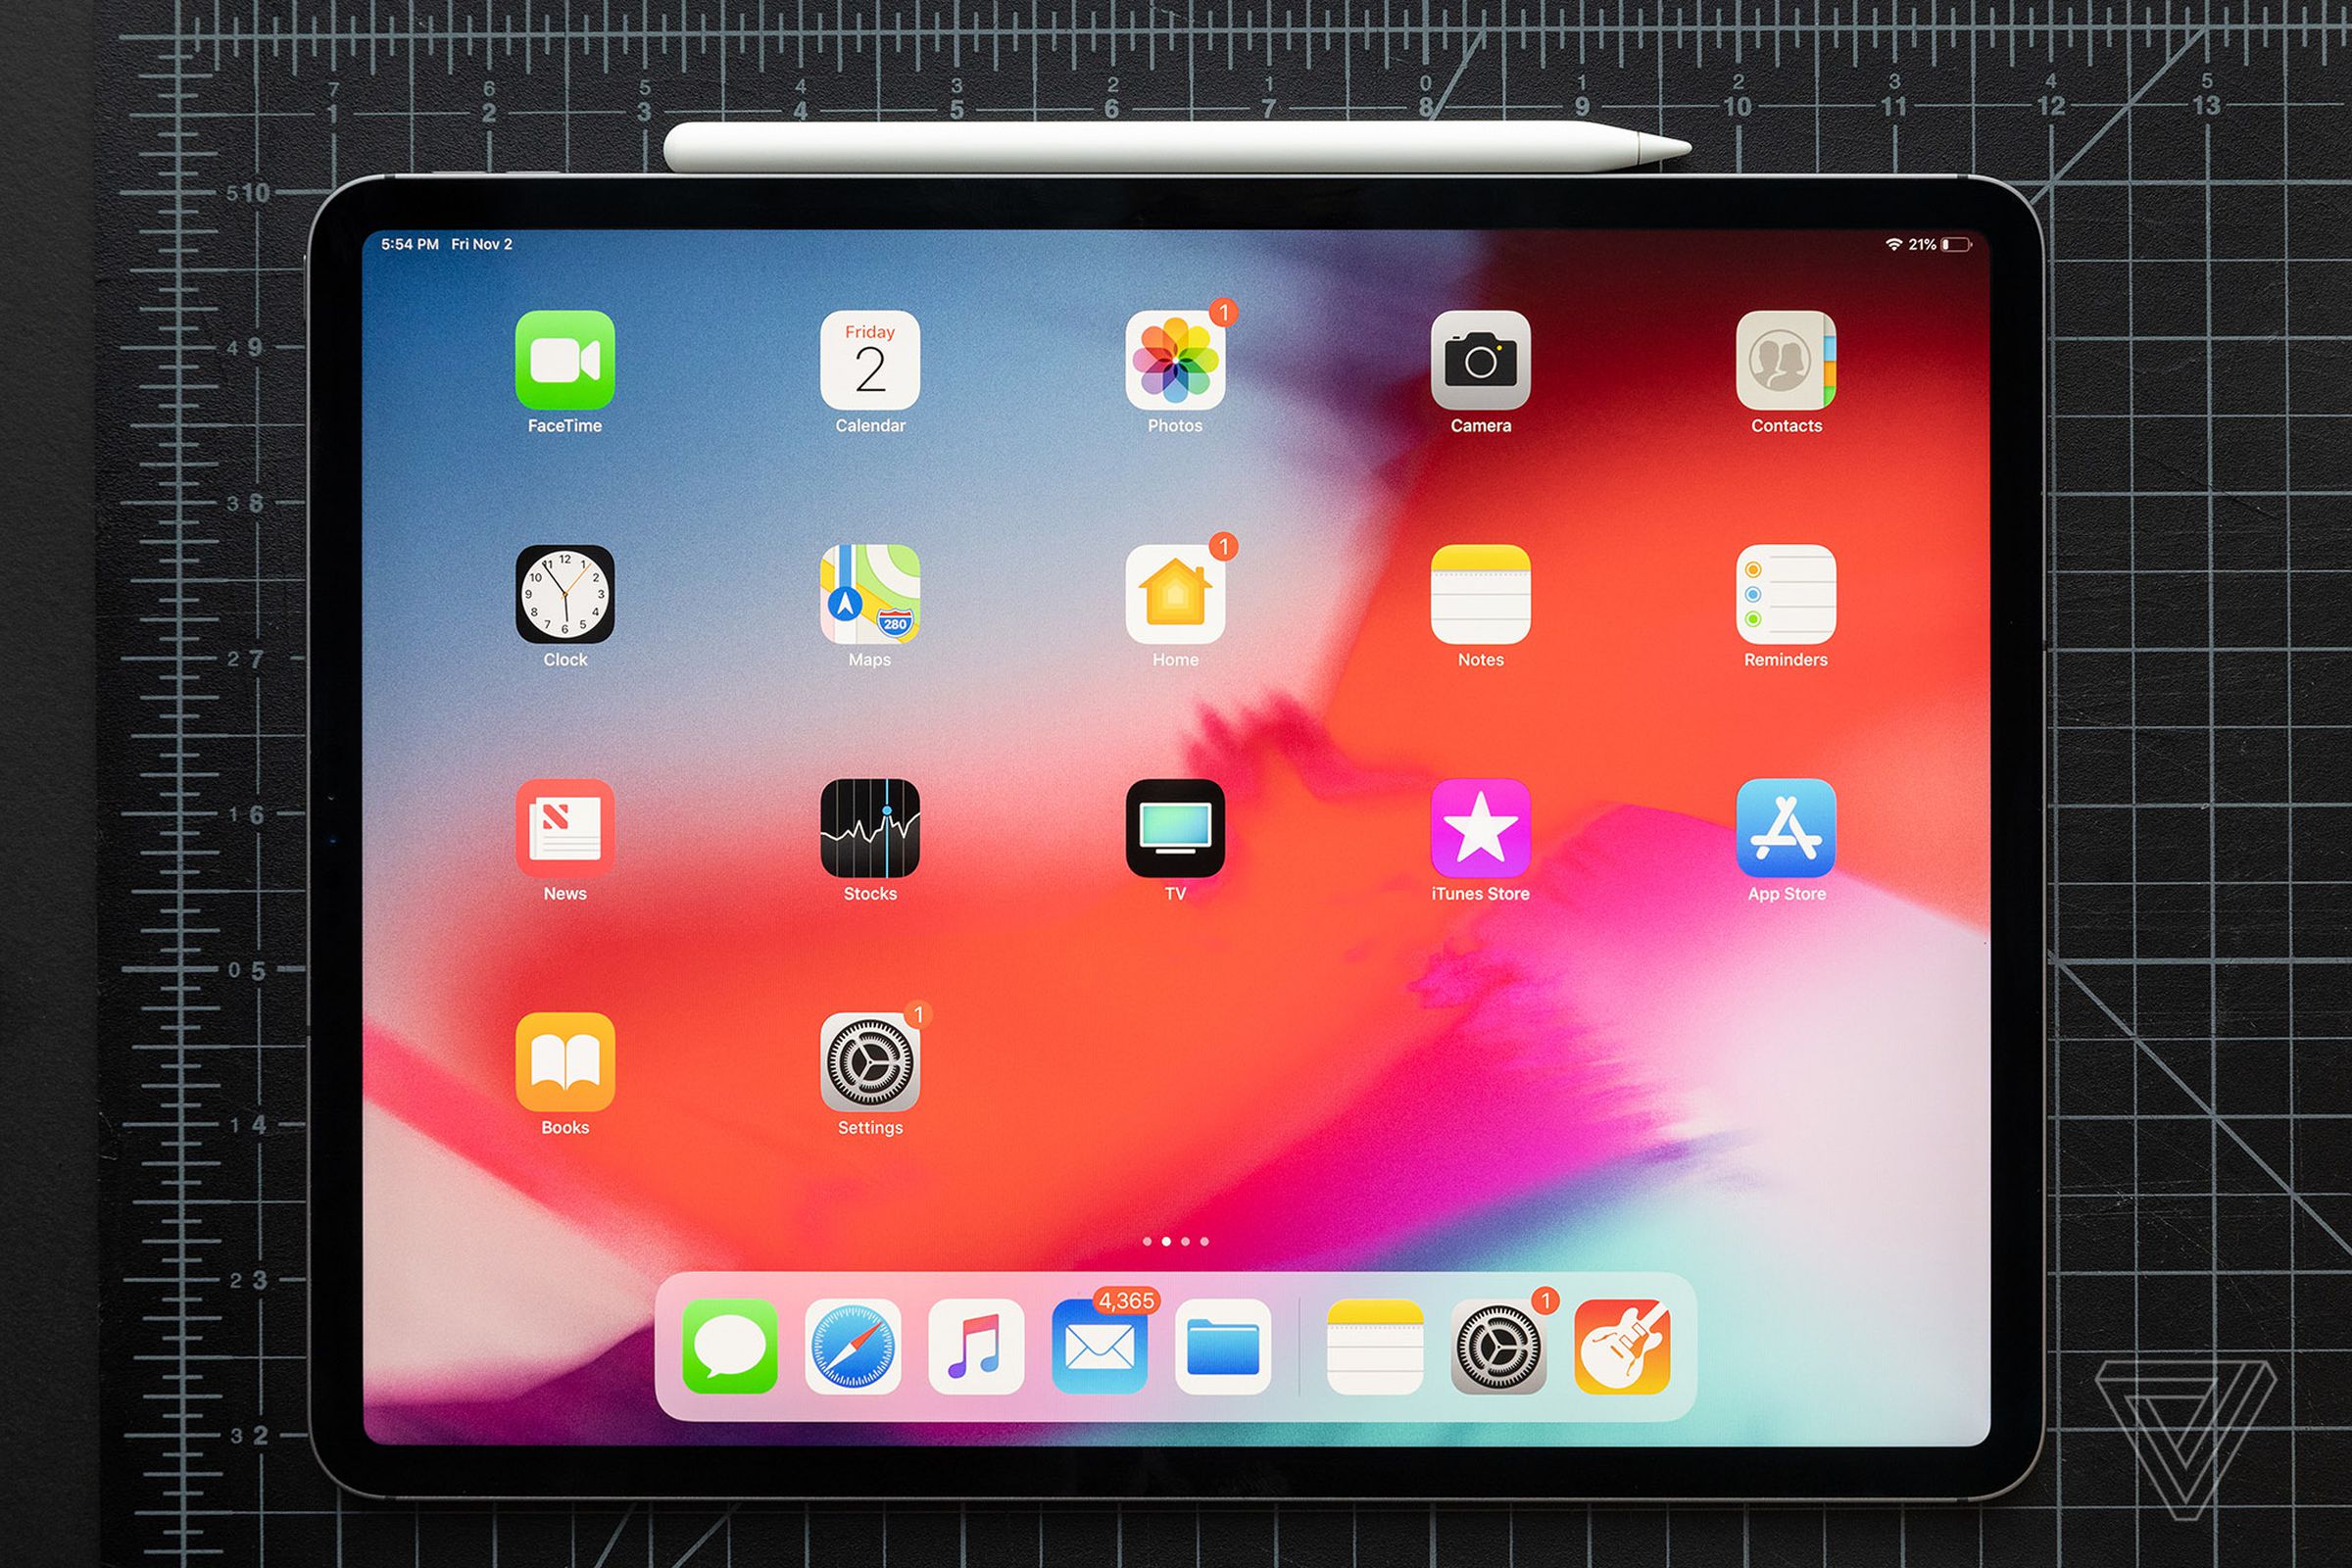 The overall appearance of this year’s iPad Pros are expected to be consistent with last year’s models (pictured).